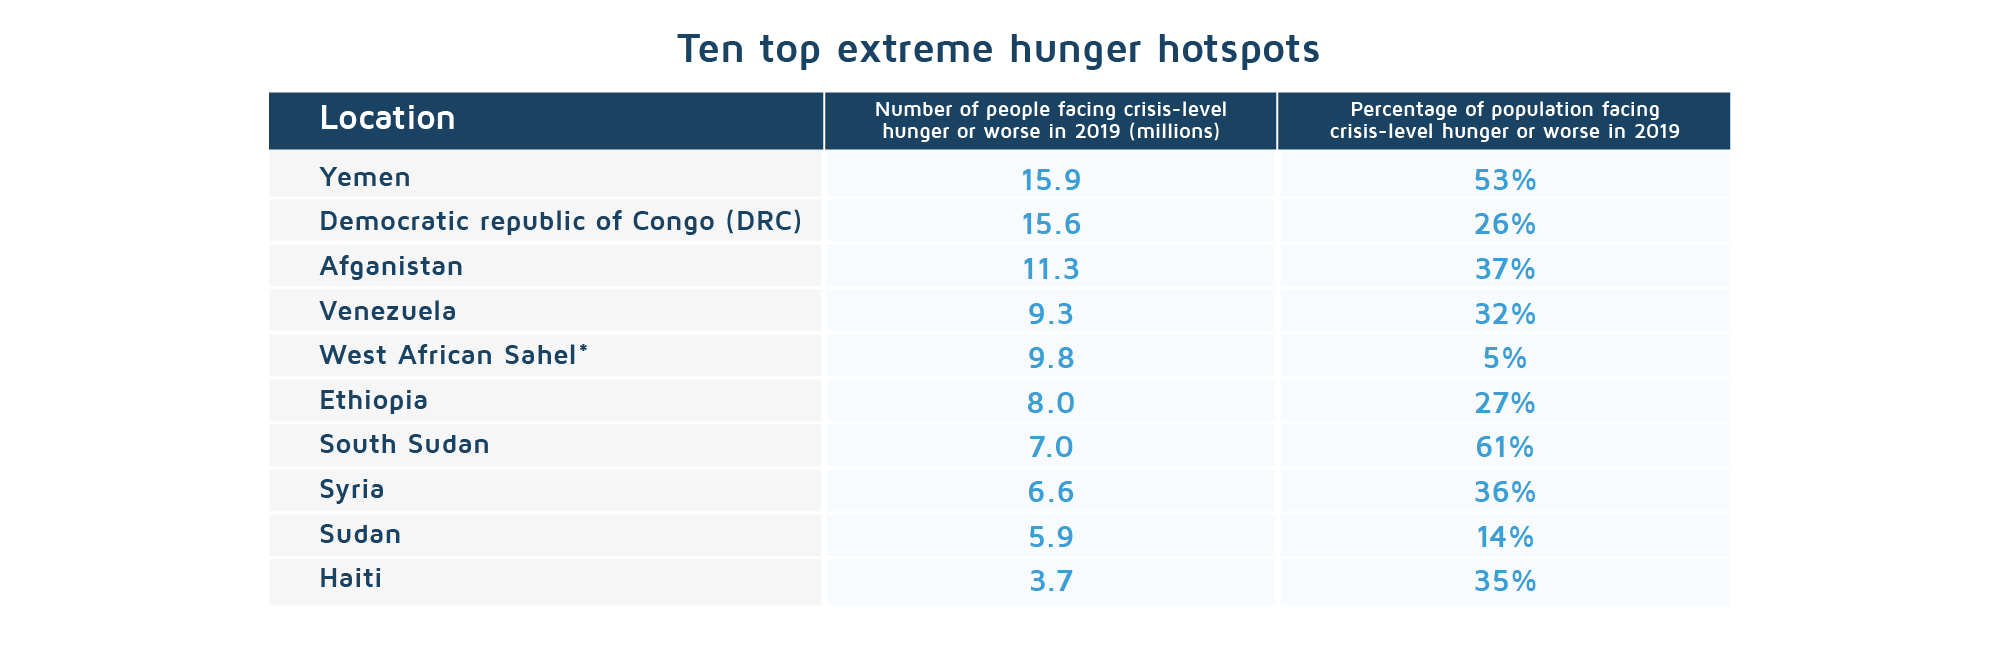 More people could die from hunger linked to COVID_ten top extreme hunger hotspots